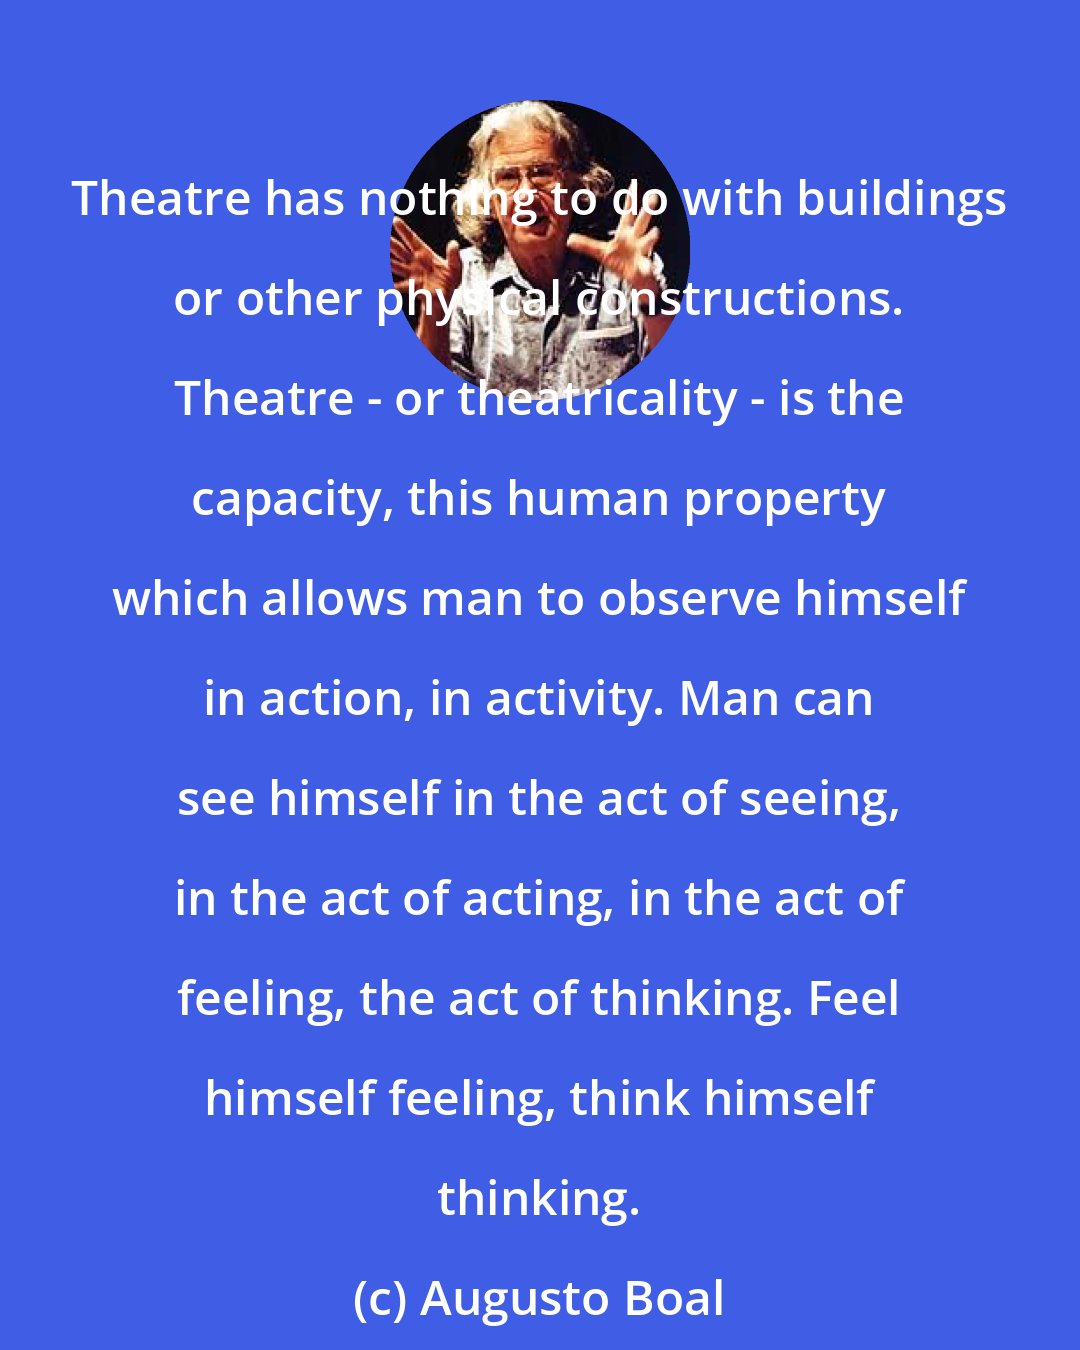 Augusto Boal: Theatre has nothing to do with buildings or other physical constructions. Theatre - or theatricality - is the capacity, this human property which allows man to observe himself in action, in activity. Man can see himself in the act of seeing, in the act of acting, in the act of feeling, the act of thinking. Feel himself feeling, think himself thinking.